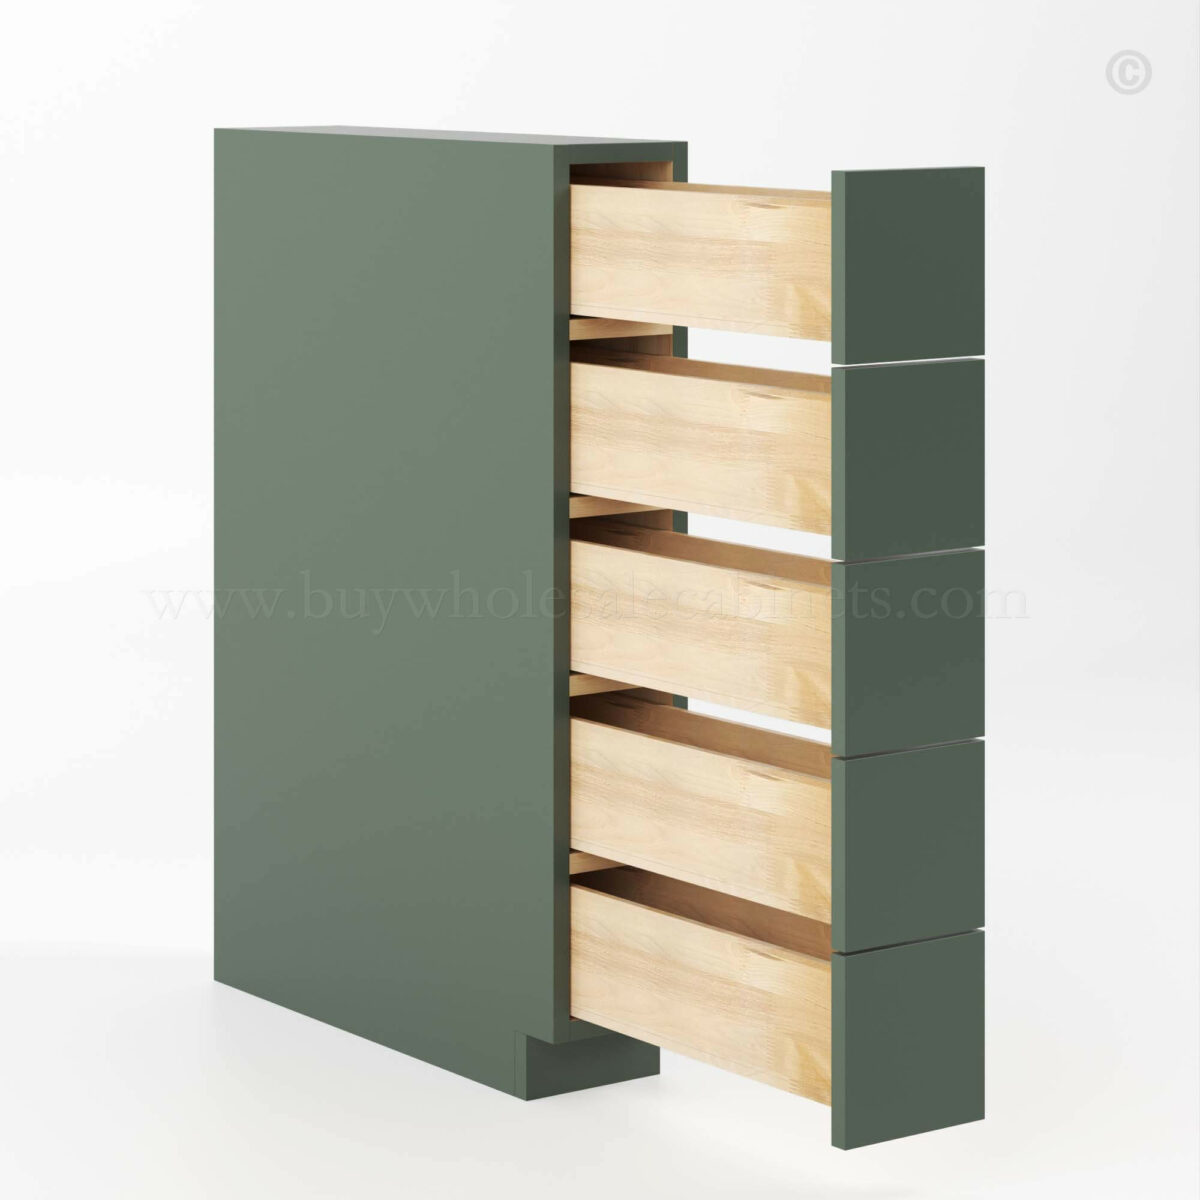 Slim Shaker Green Base Spice Drawers Cabinet, rta cabinets, wholesale cabinets